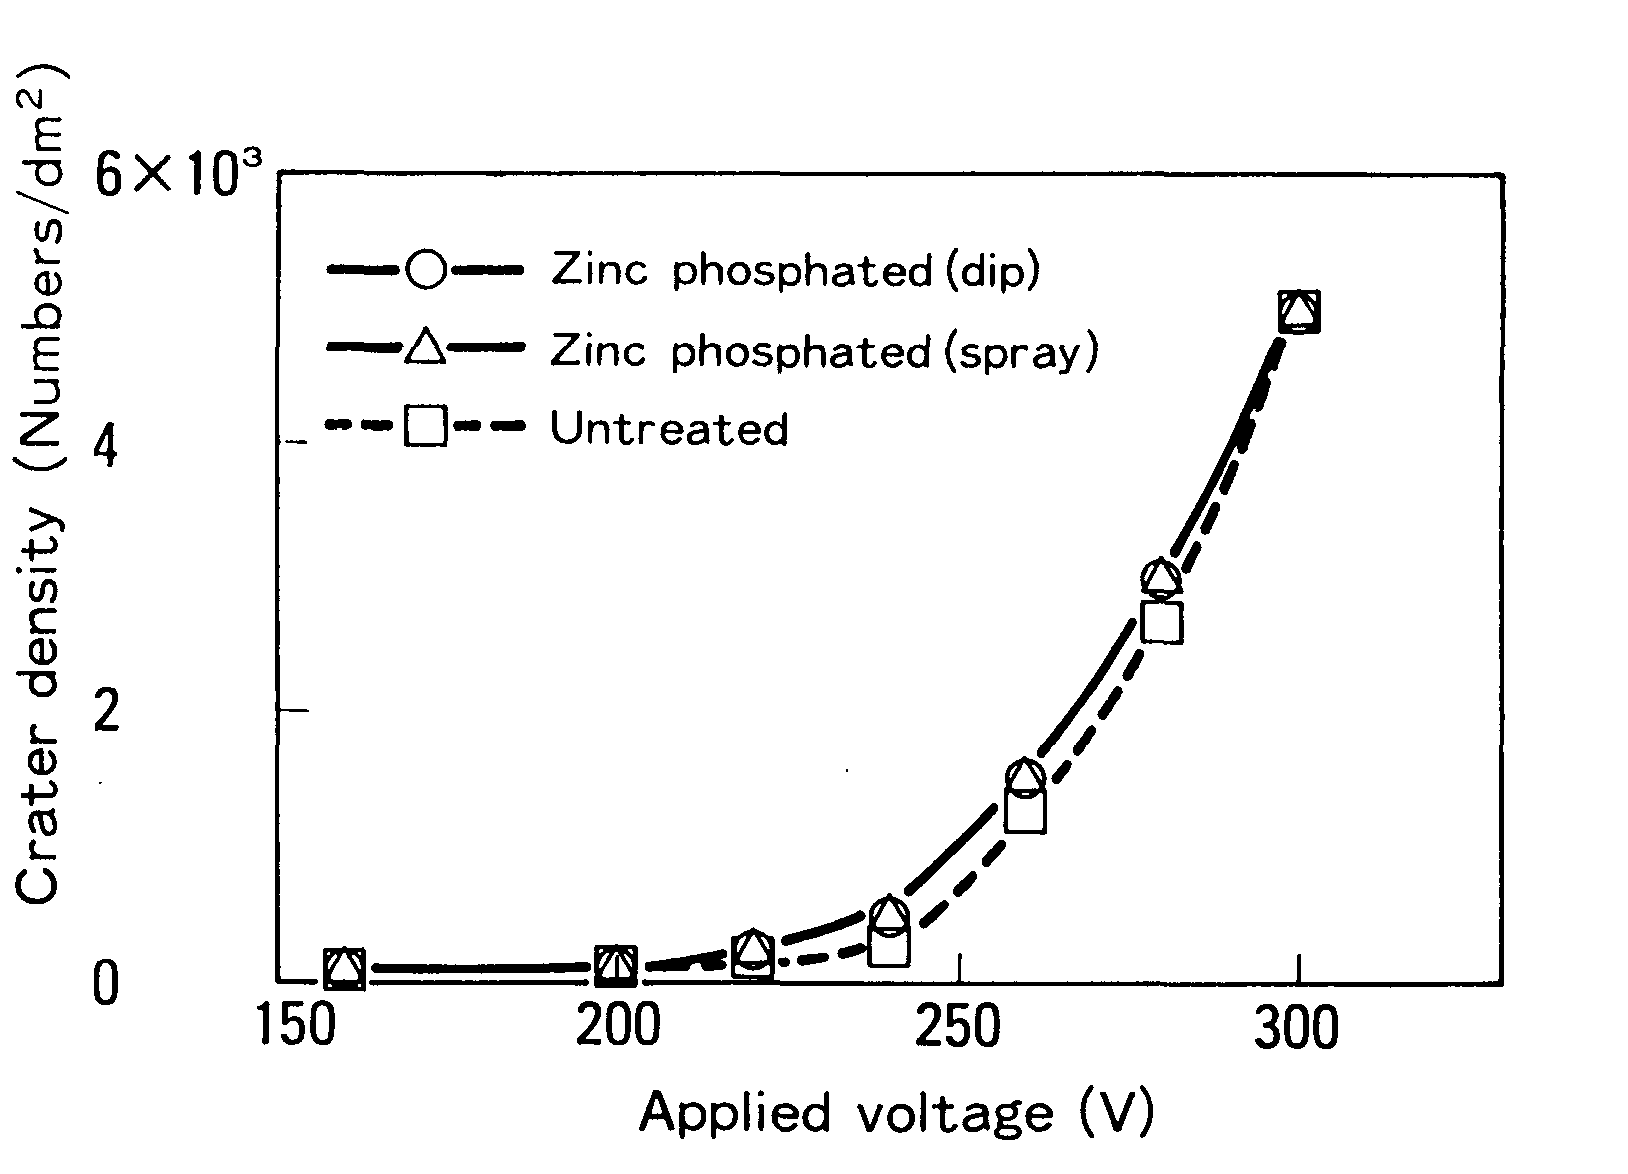 Effect of zinc phosphate treatment on the crater density (steel sheet: GA, epoxy paint).